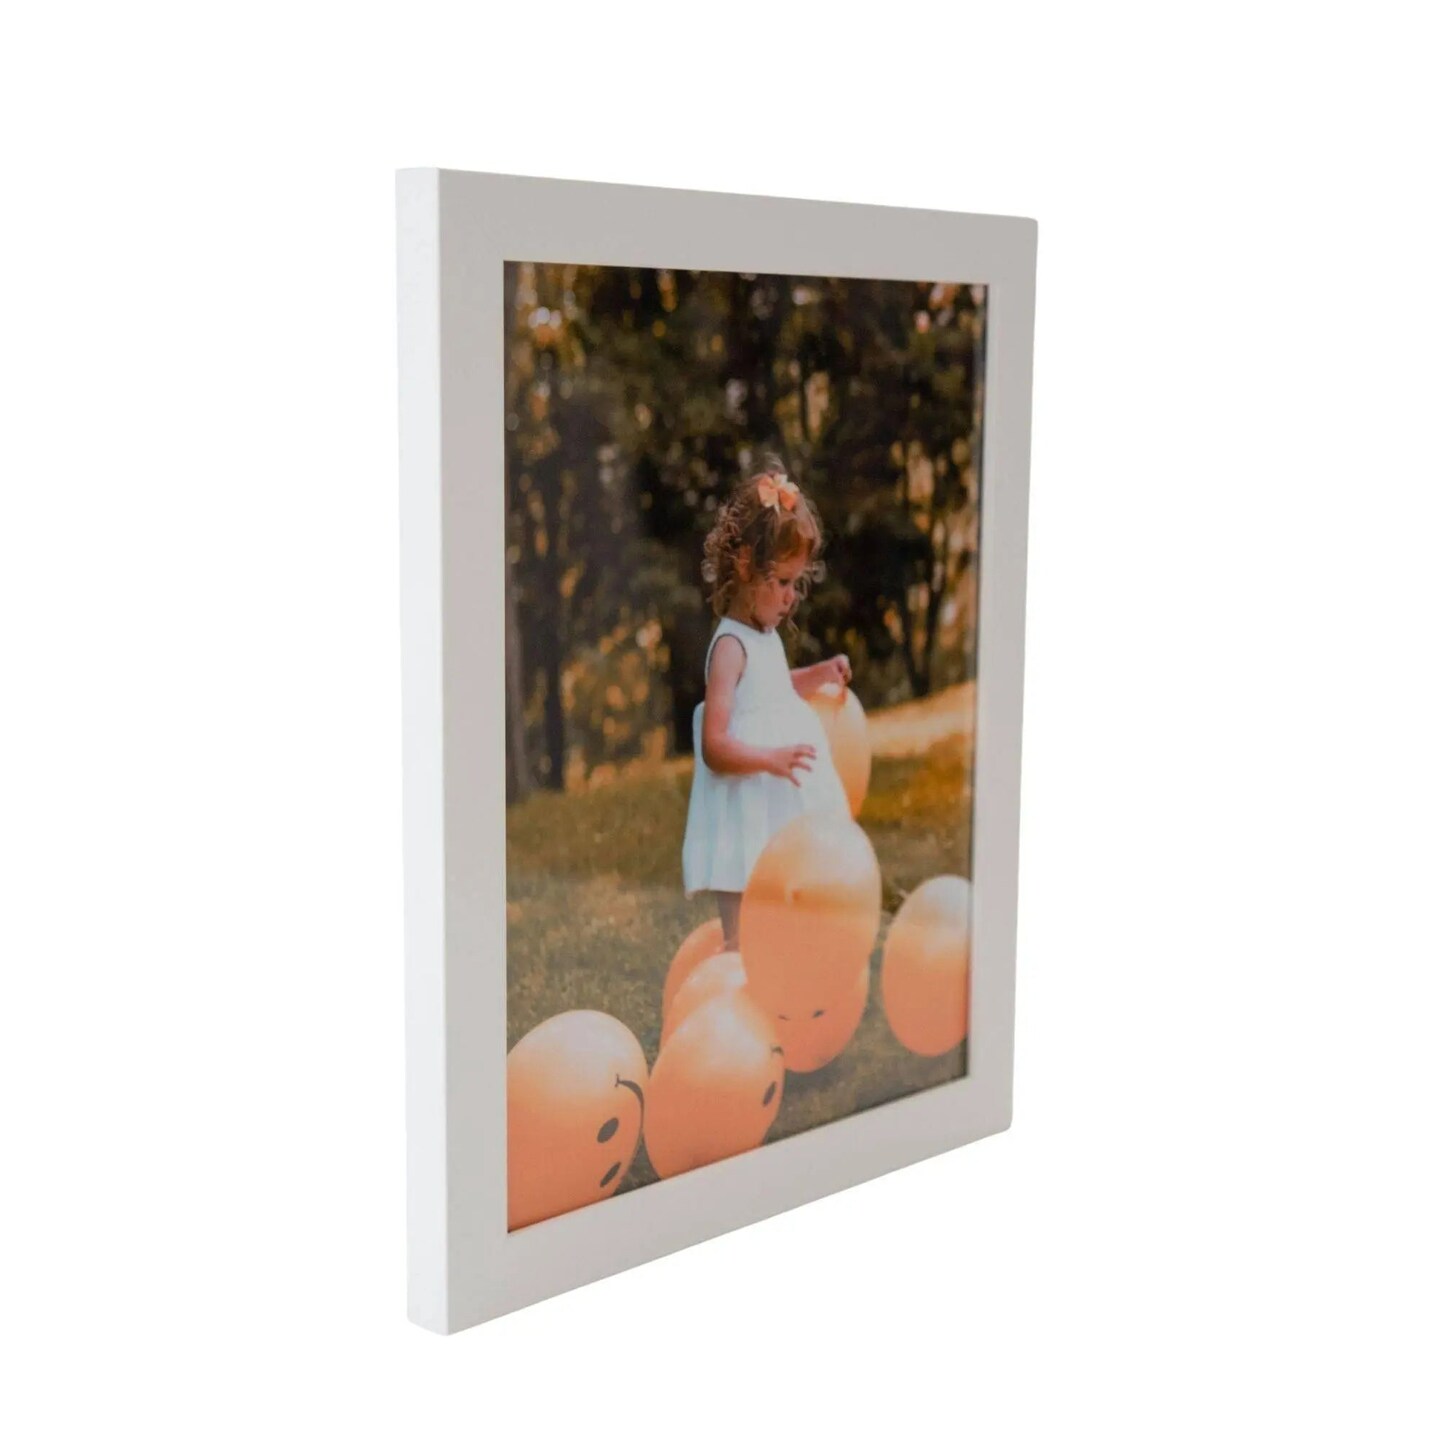 Gallery 24x24 Picture Frame Black 24x24 Frame 24 x 24 Photo Frames 24 x 24 Square